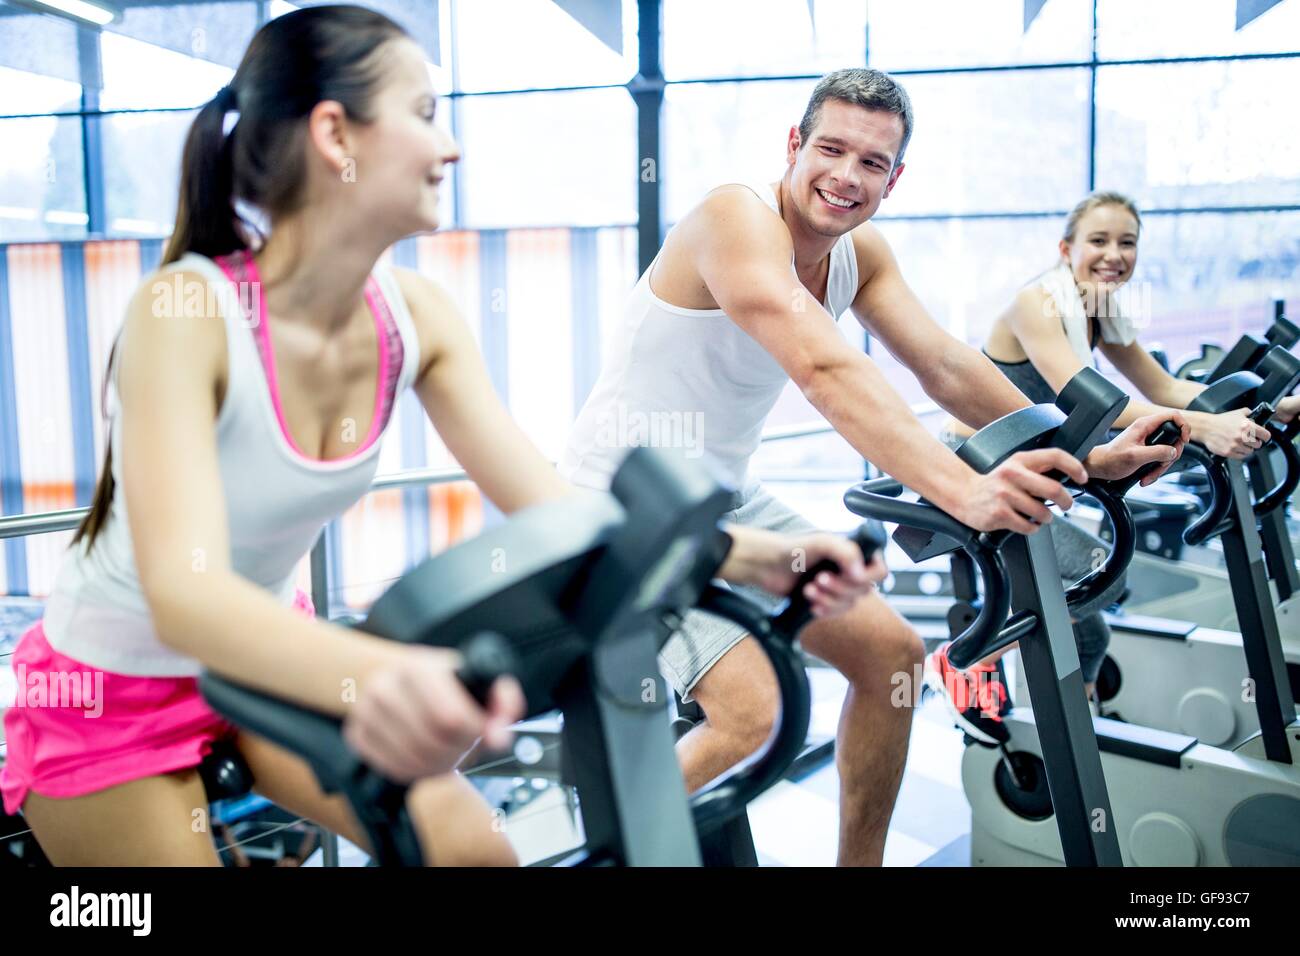 PROPERTY RELEASED. MODEL RELEASED. Young men and women working out on exercise machines in gym, smiling. Stock Photo